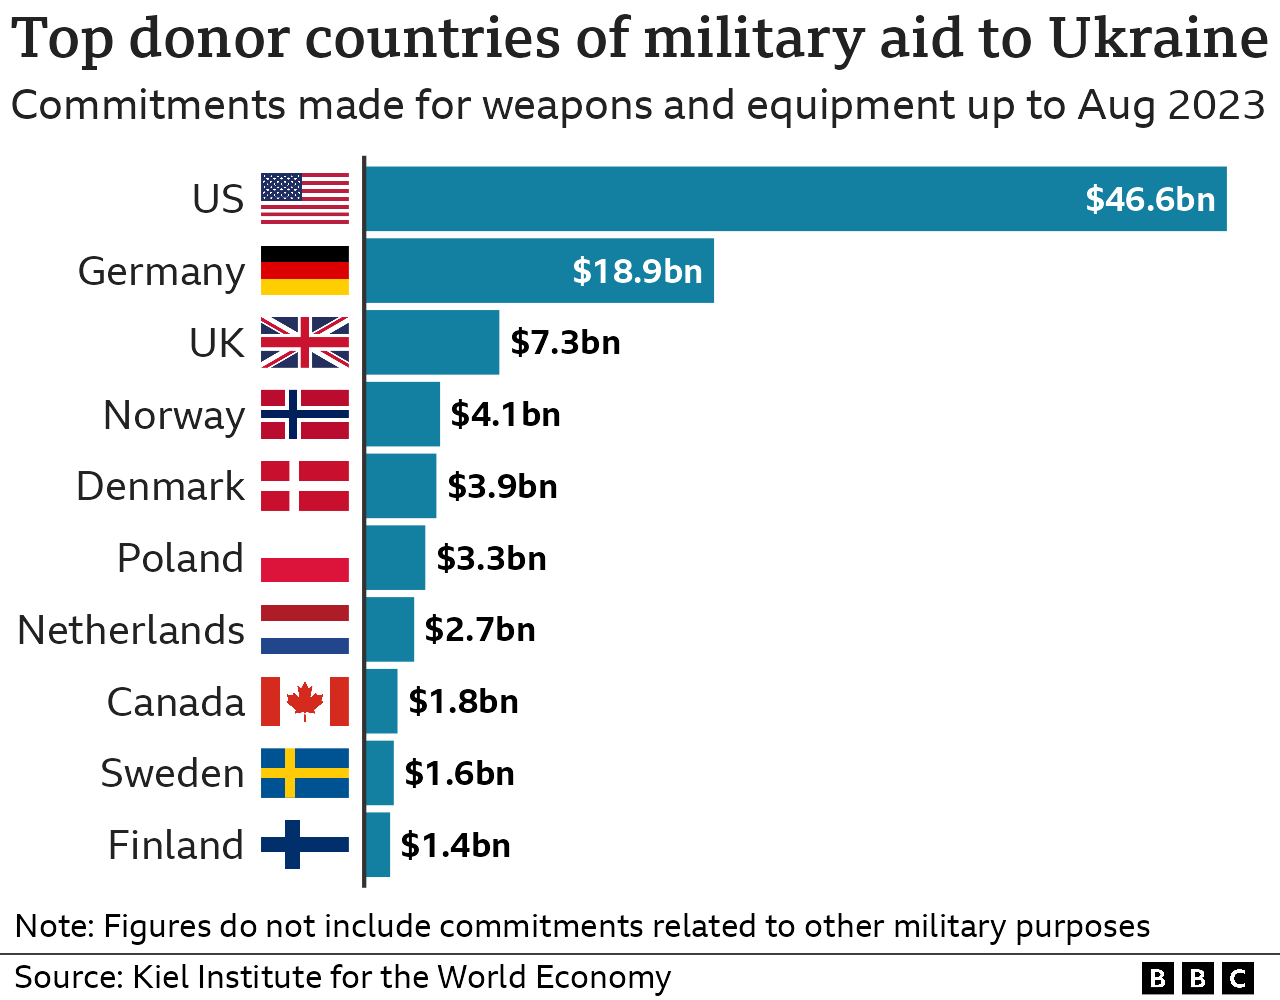 Chart showing the top donor countries of military aid to Ukraine